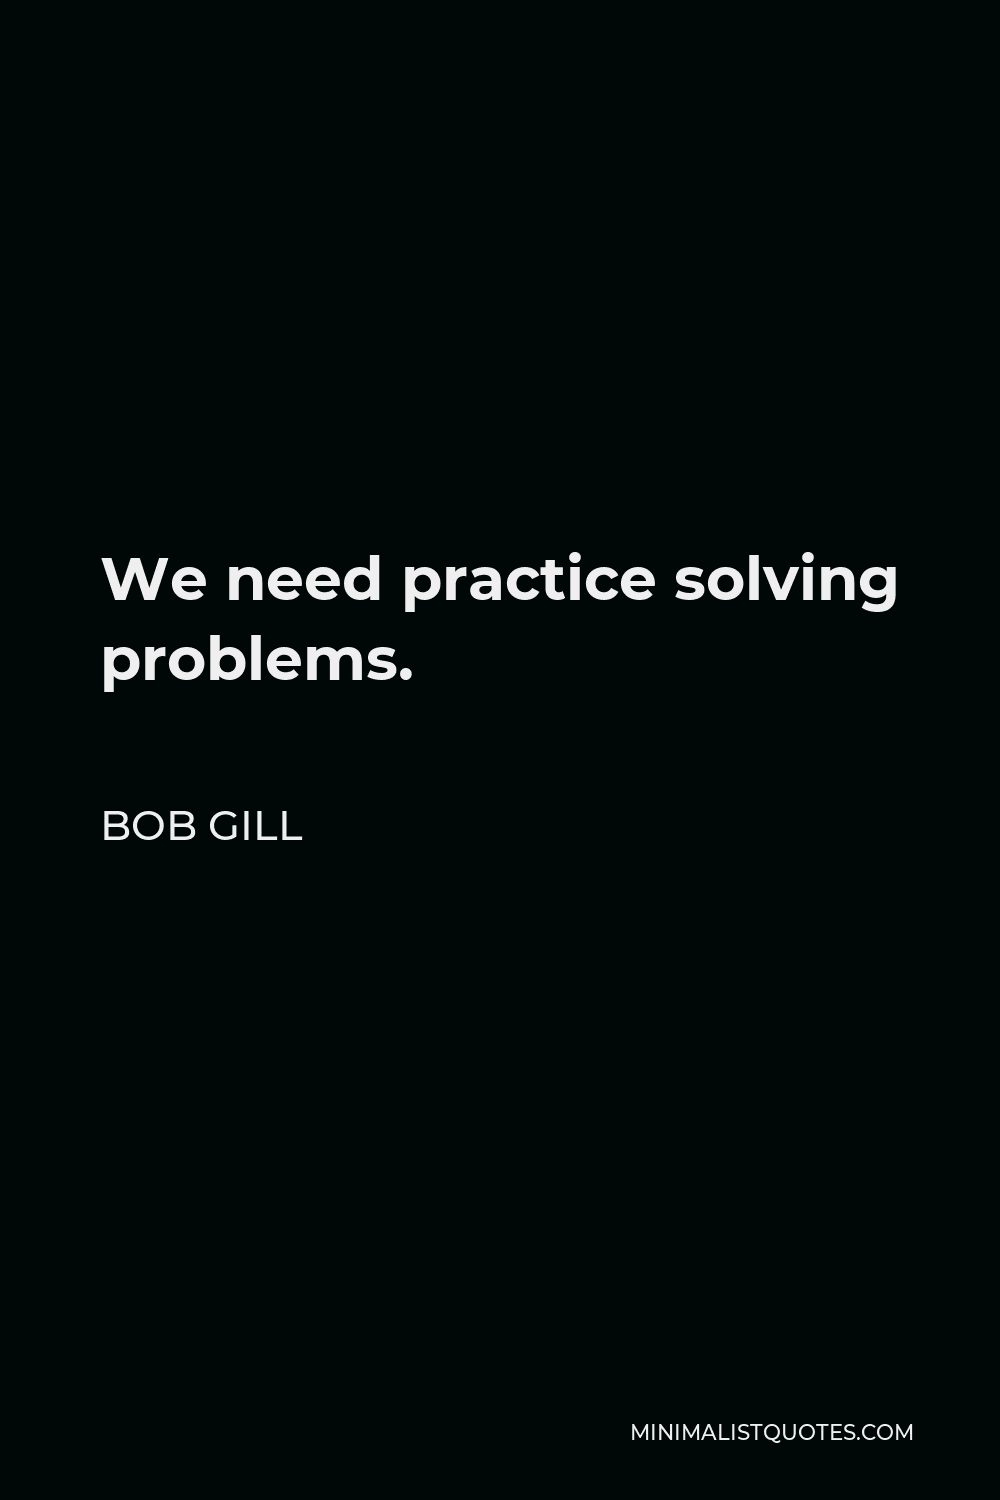 Bob Gill Quote - We need practice solving problems.